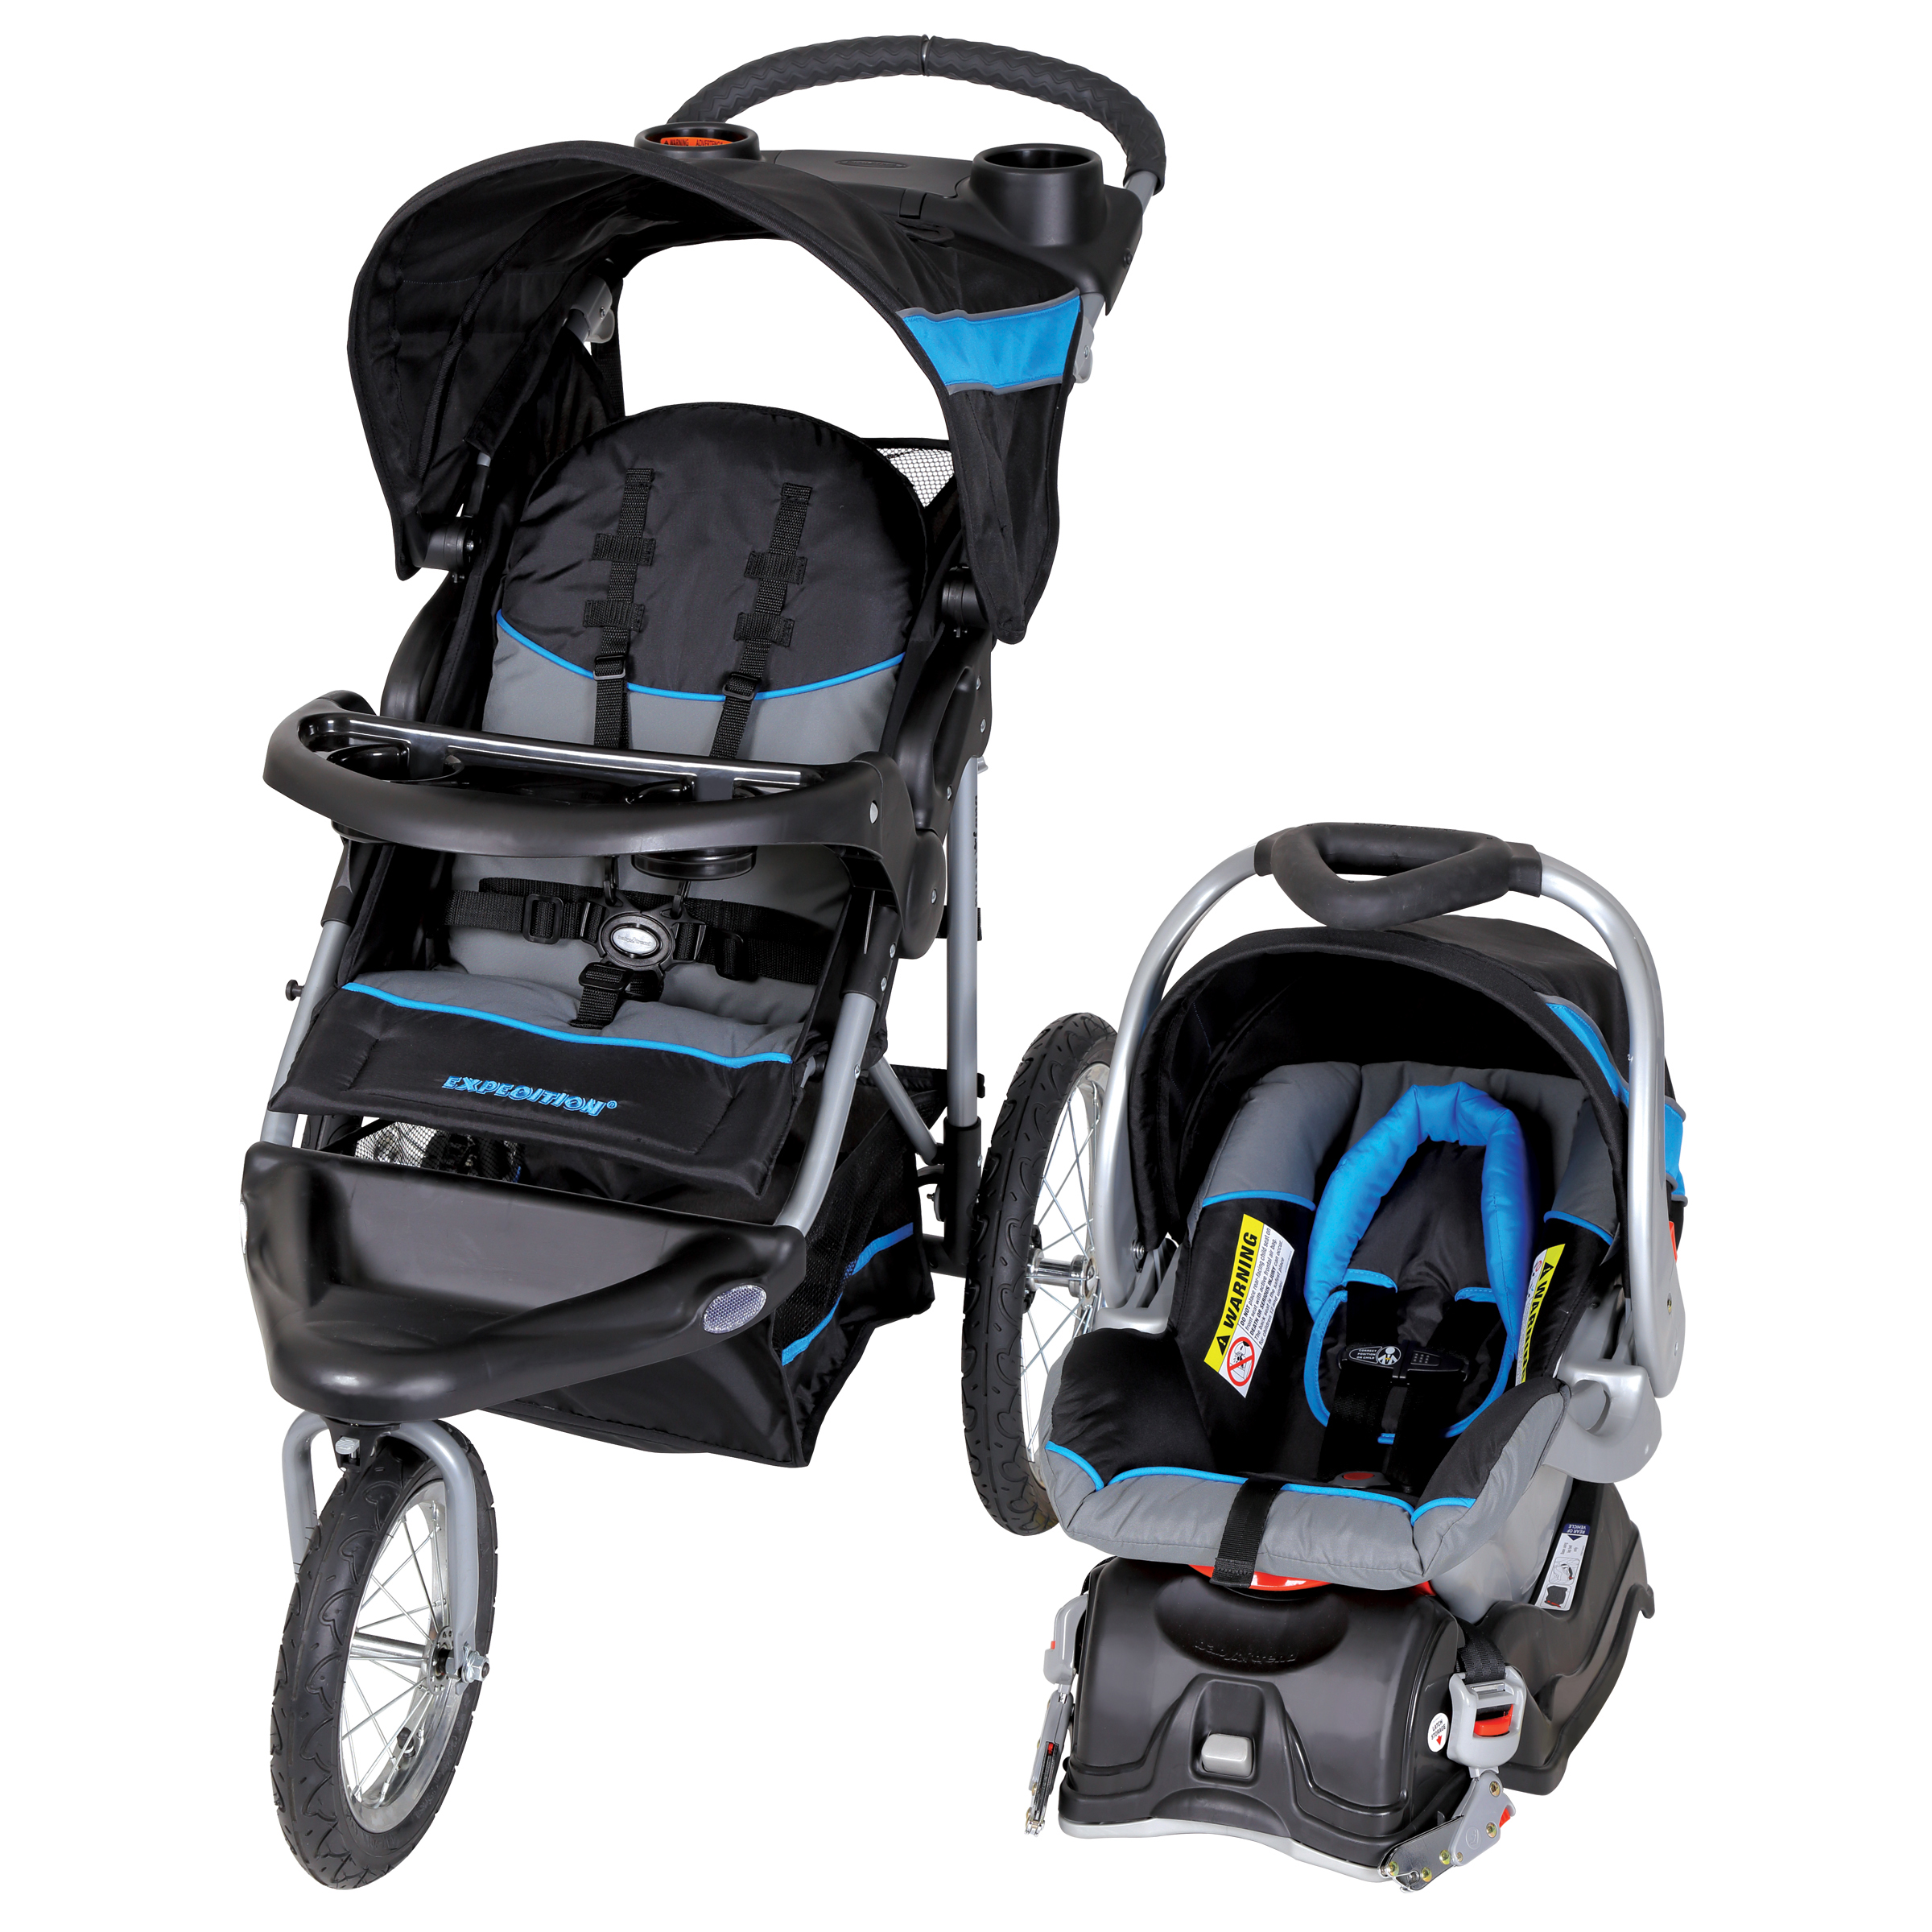 sears travel system